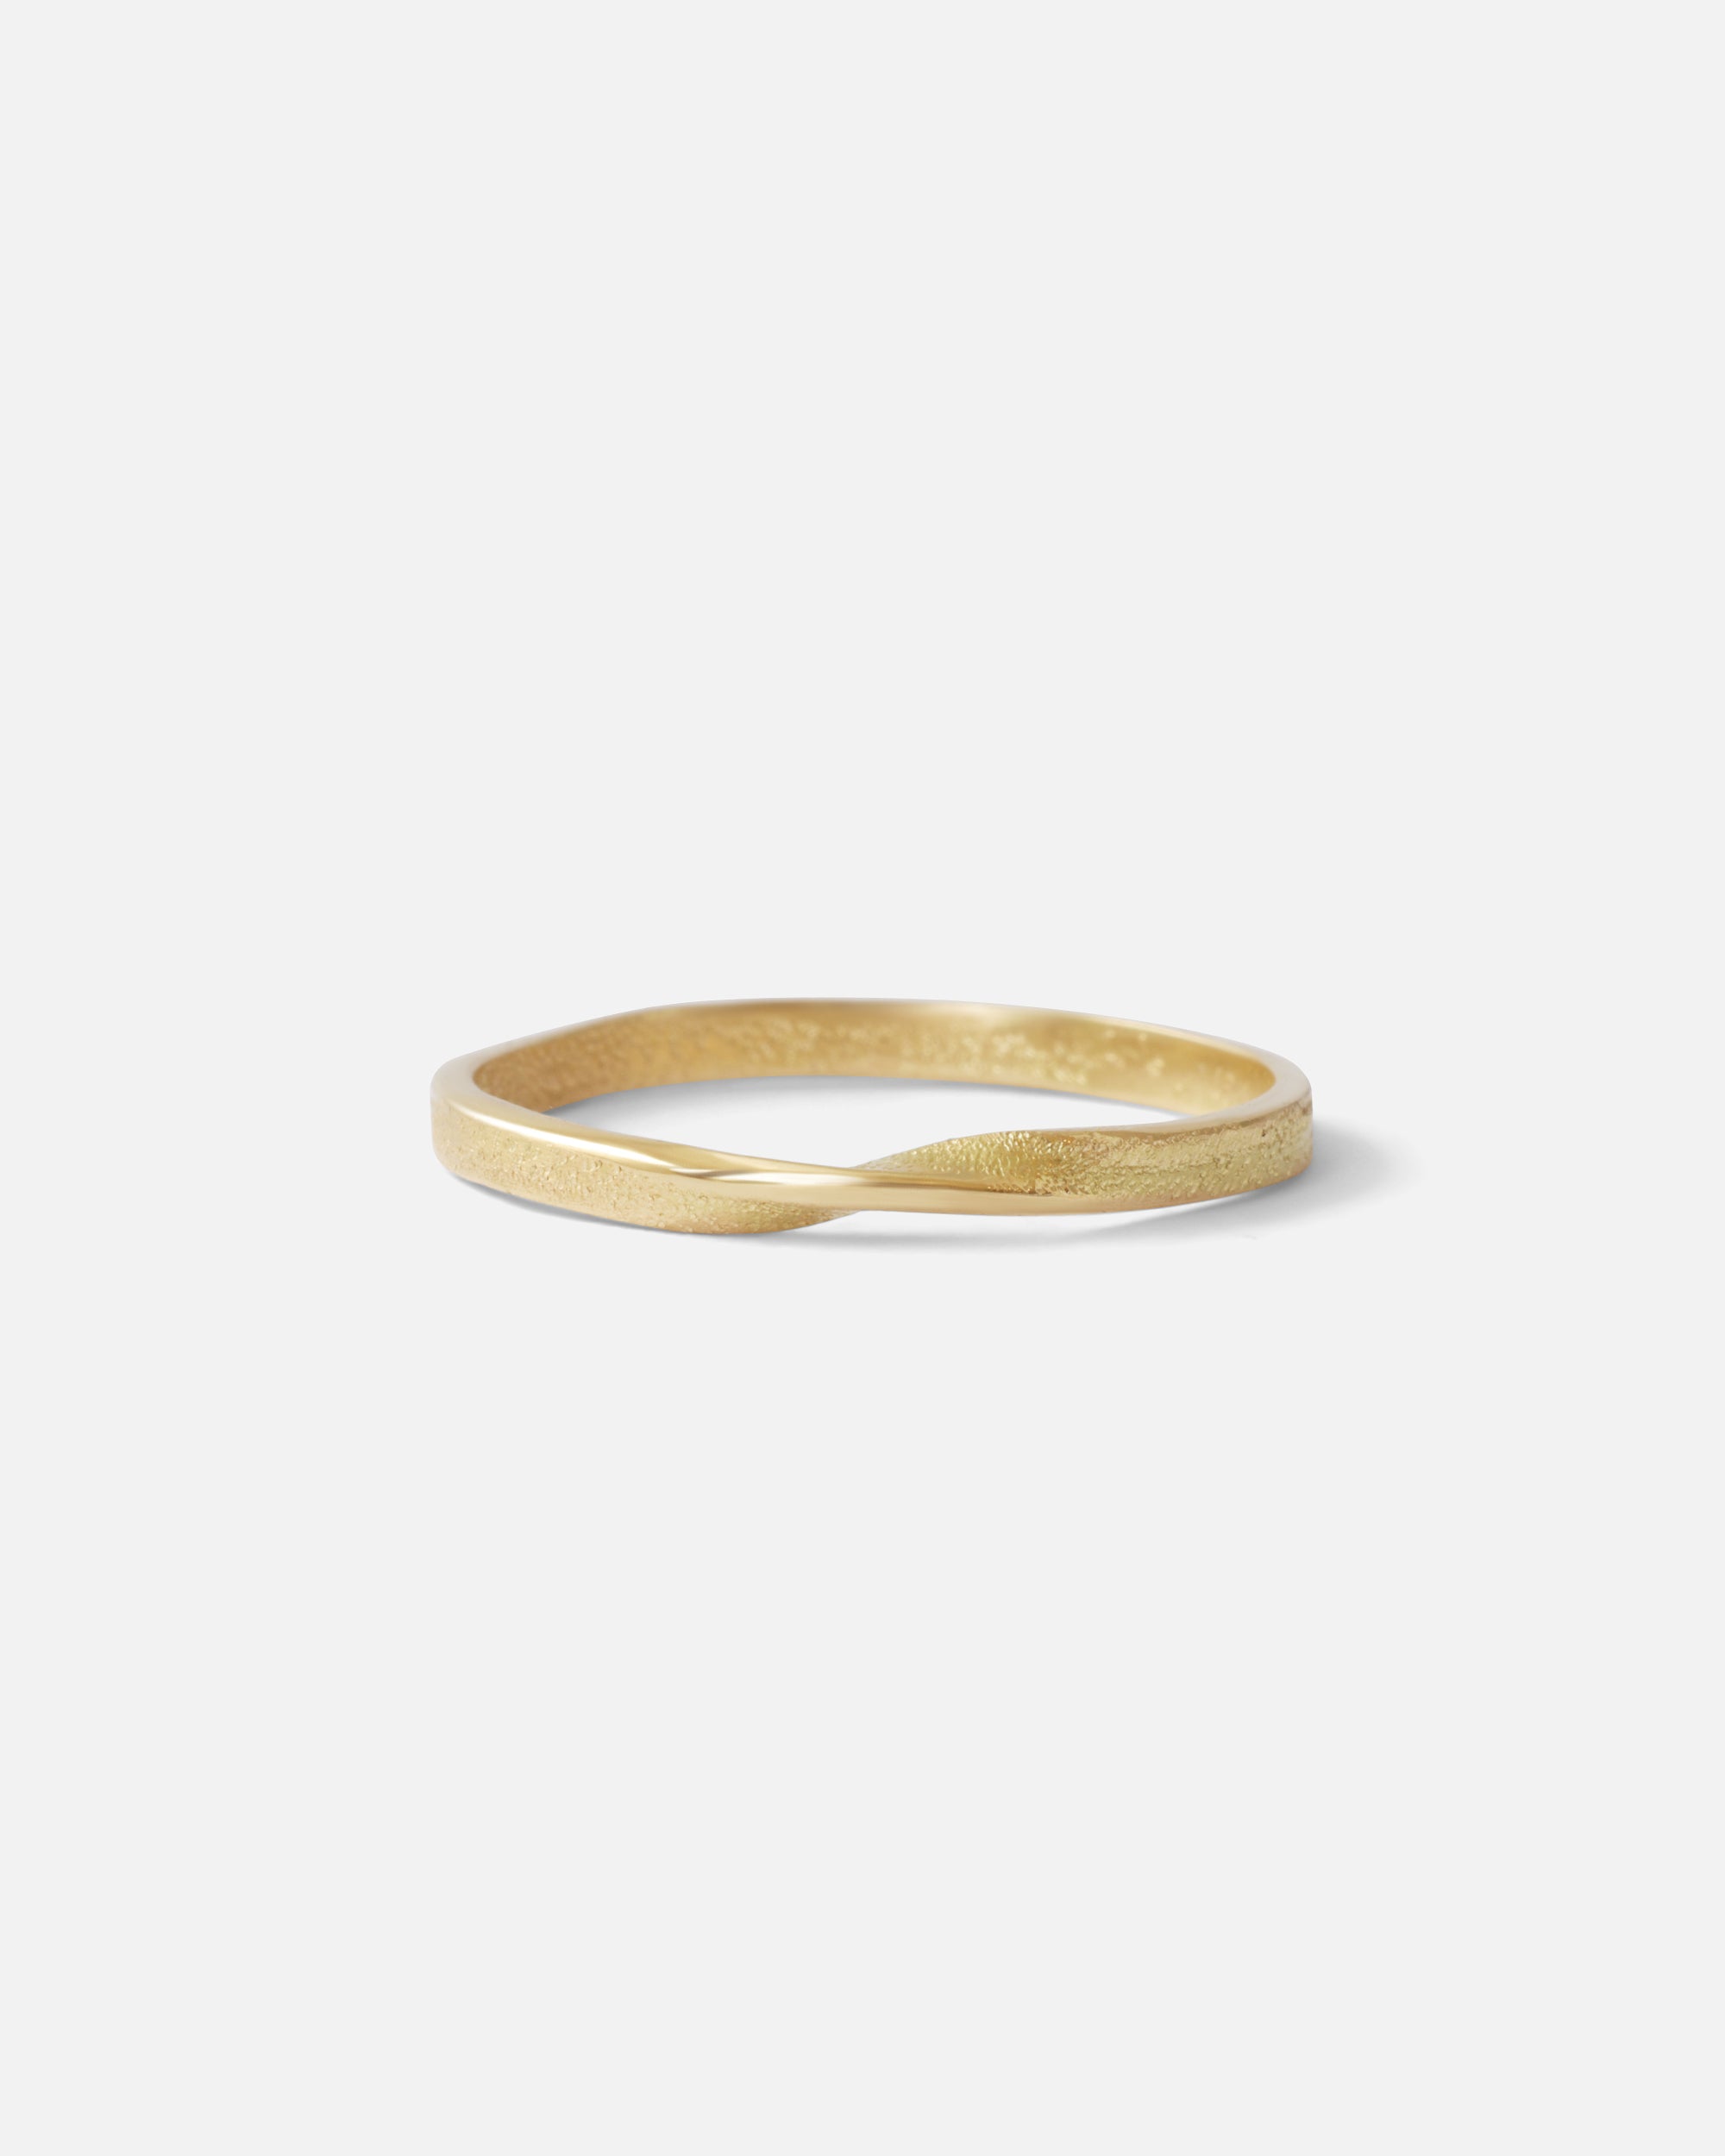 Hwan Twist Ring By Young Sun Song